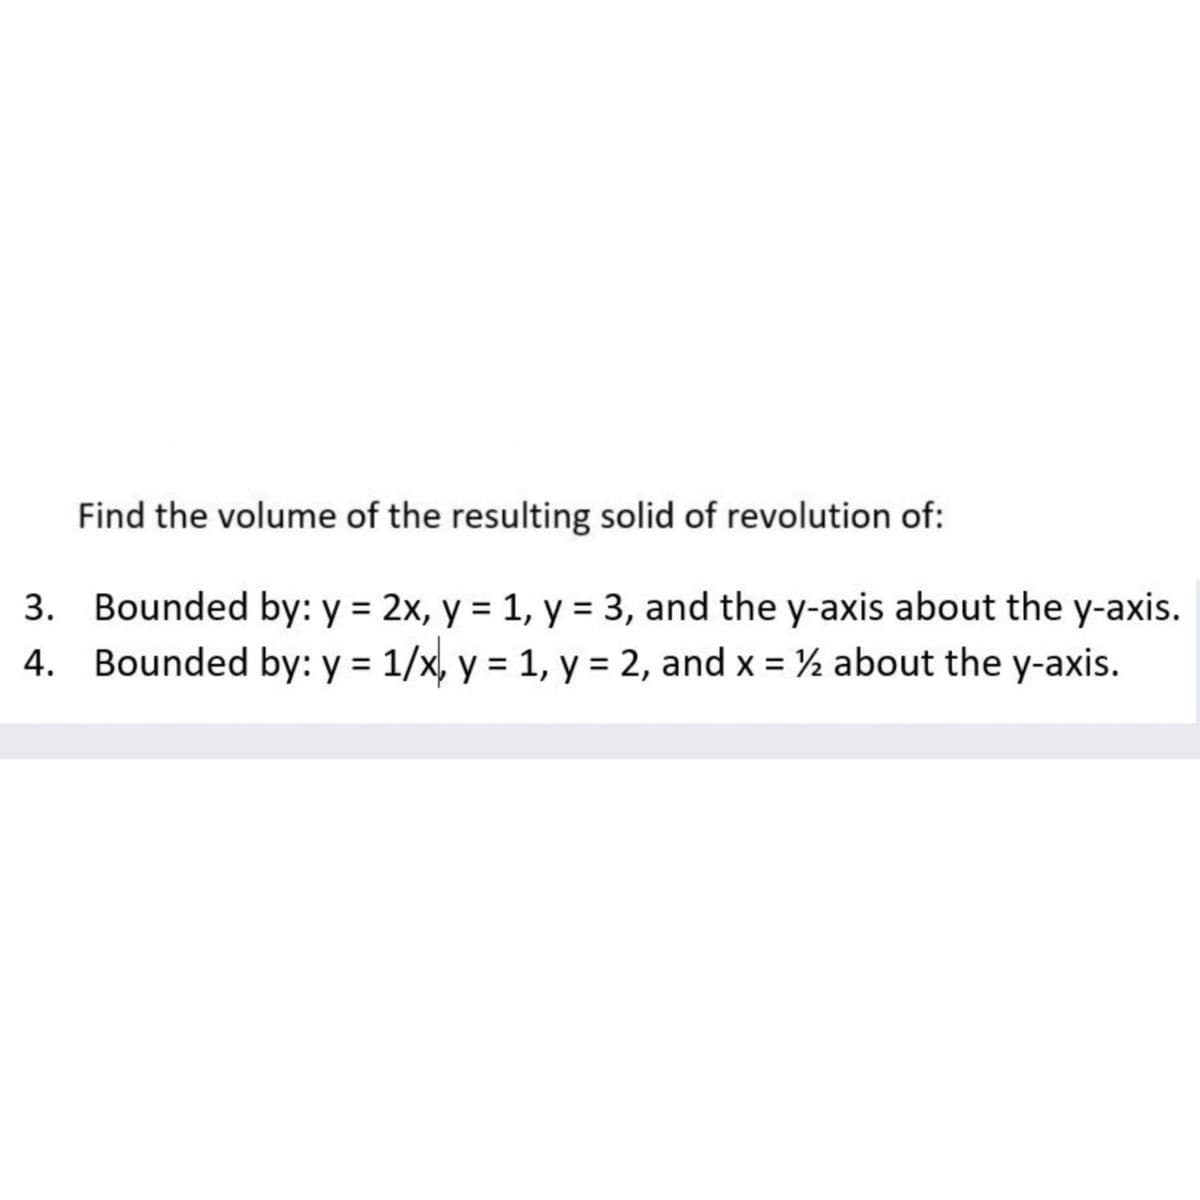 Find the volume of the resulting solid of revolution of:
3. Bounded by: y = 2x, y = 1, y = 3, and the y-axis about the y-axis.
4. Bounded by: y = 1/x, y = 1, y = 2, and x = ½ about the y-axis.
%3D
%3D
